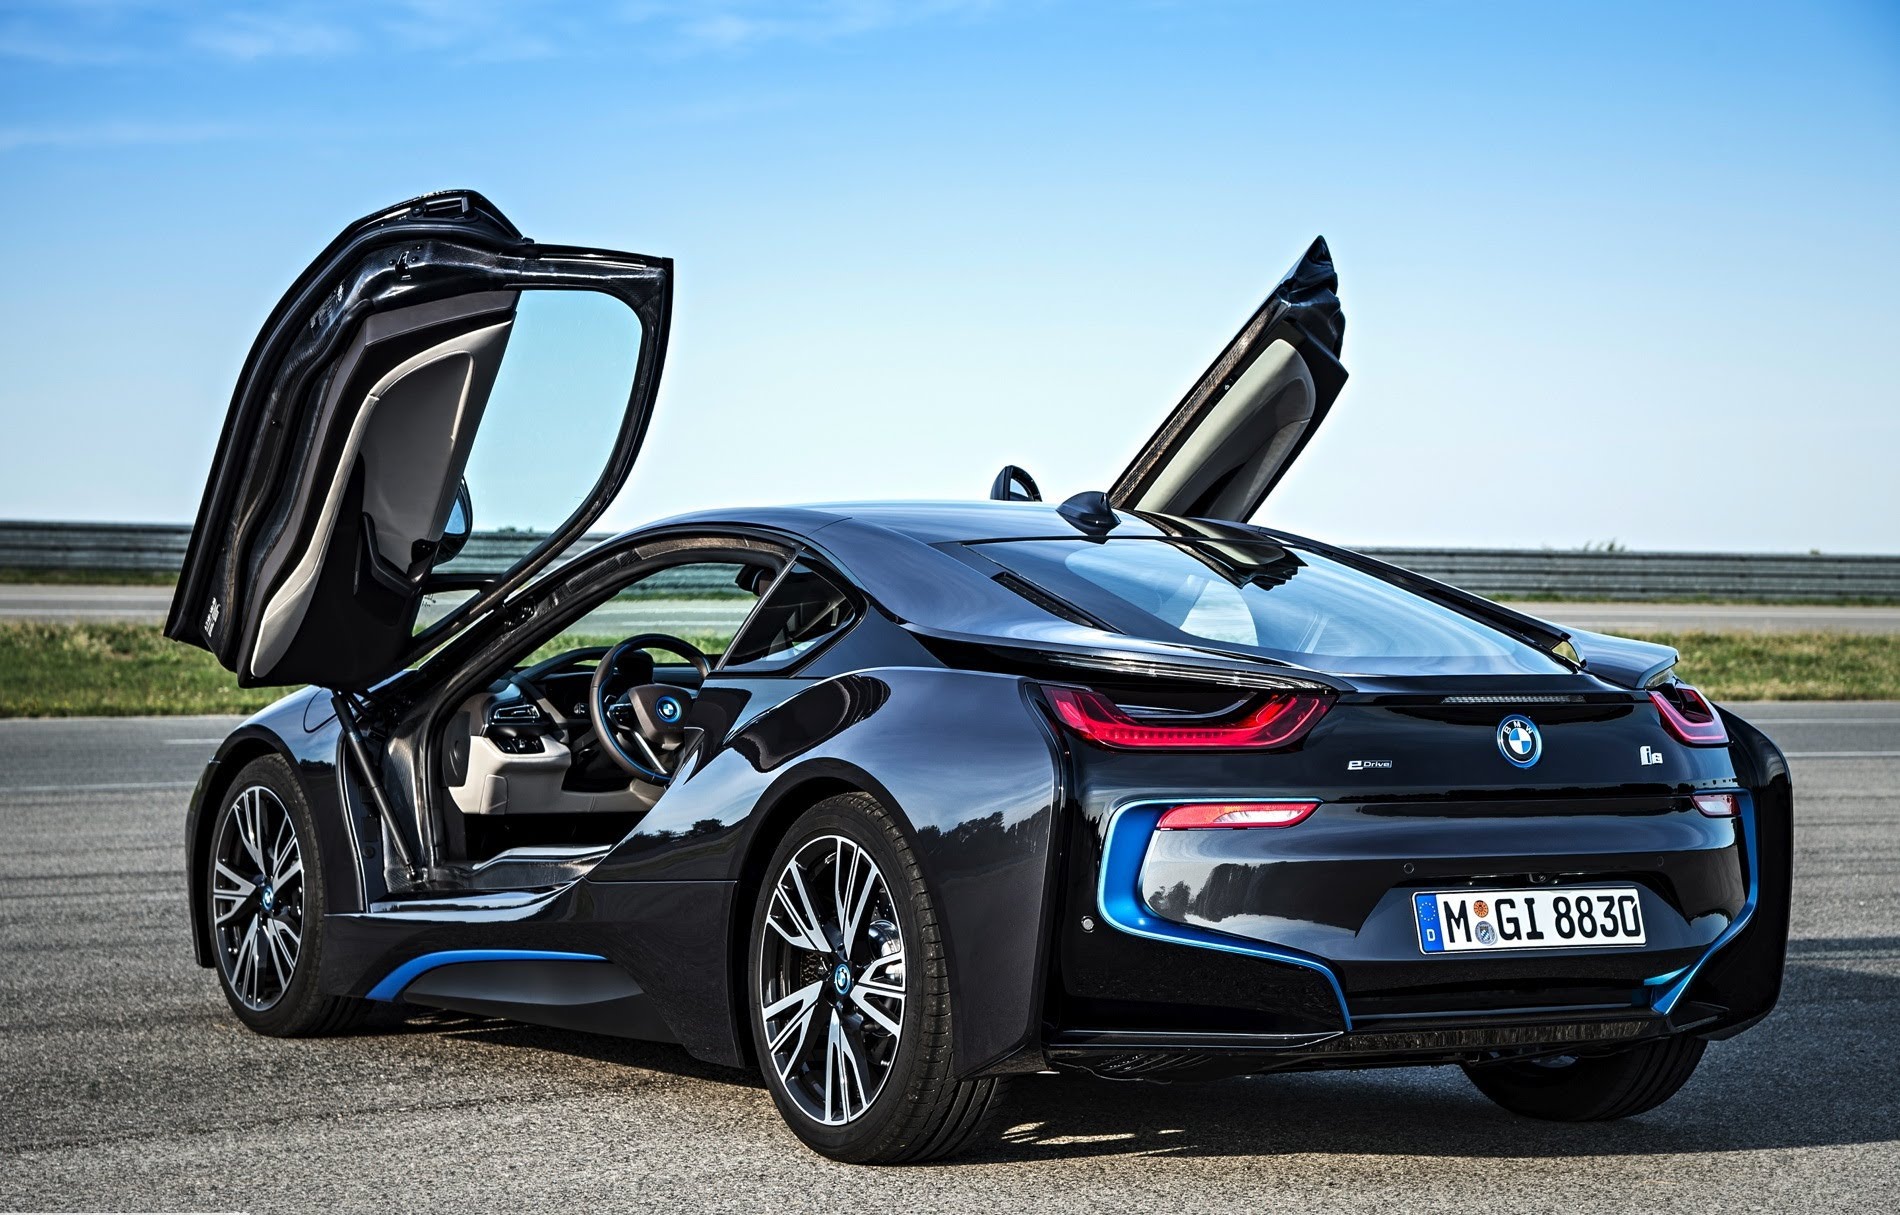 Louis Vuitton Crafts Carbon-Fiber Luggage for BMW i8 Plug-In